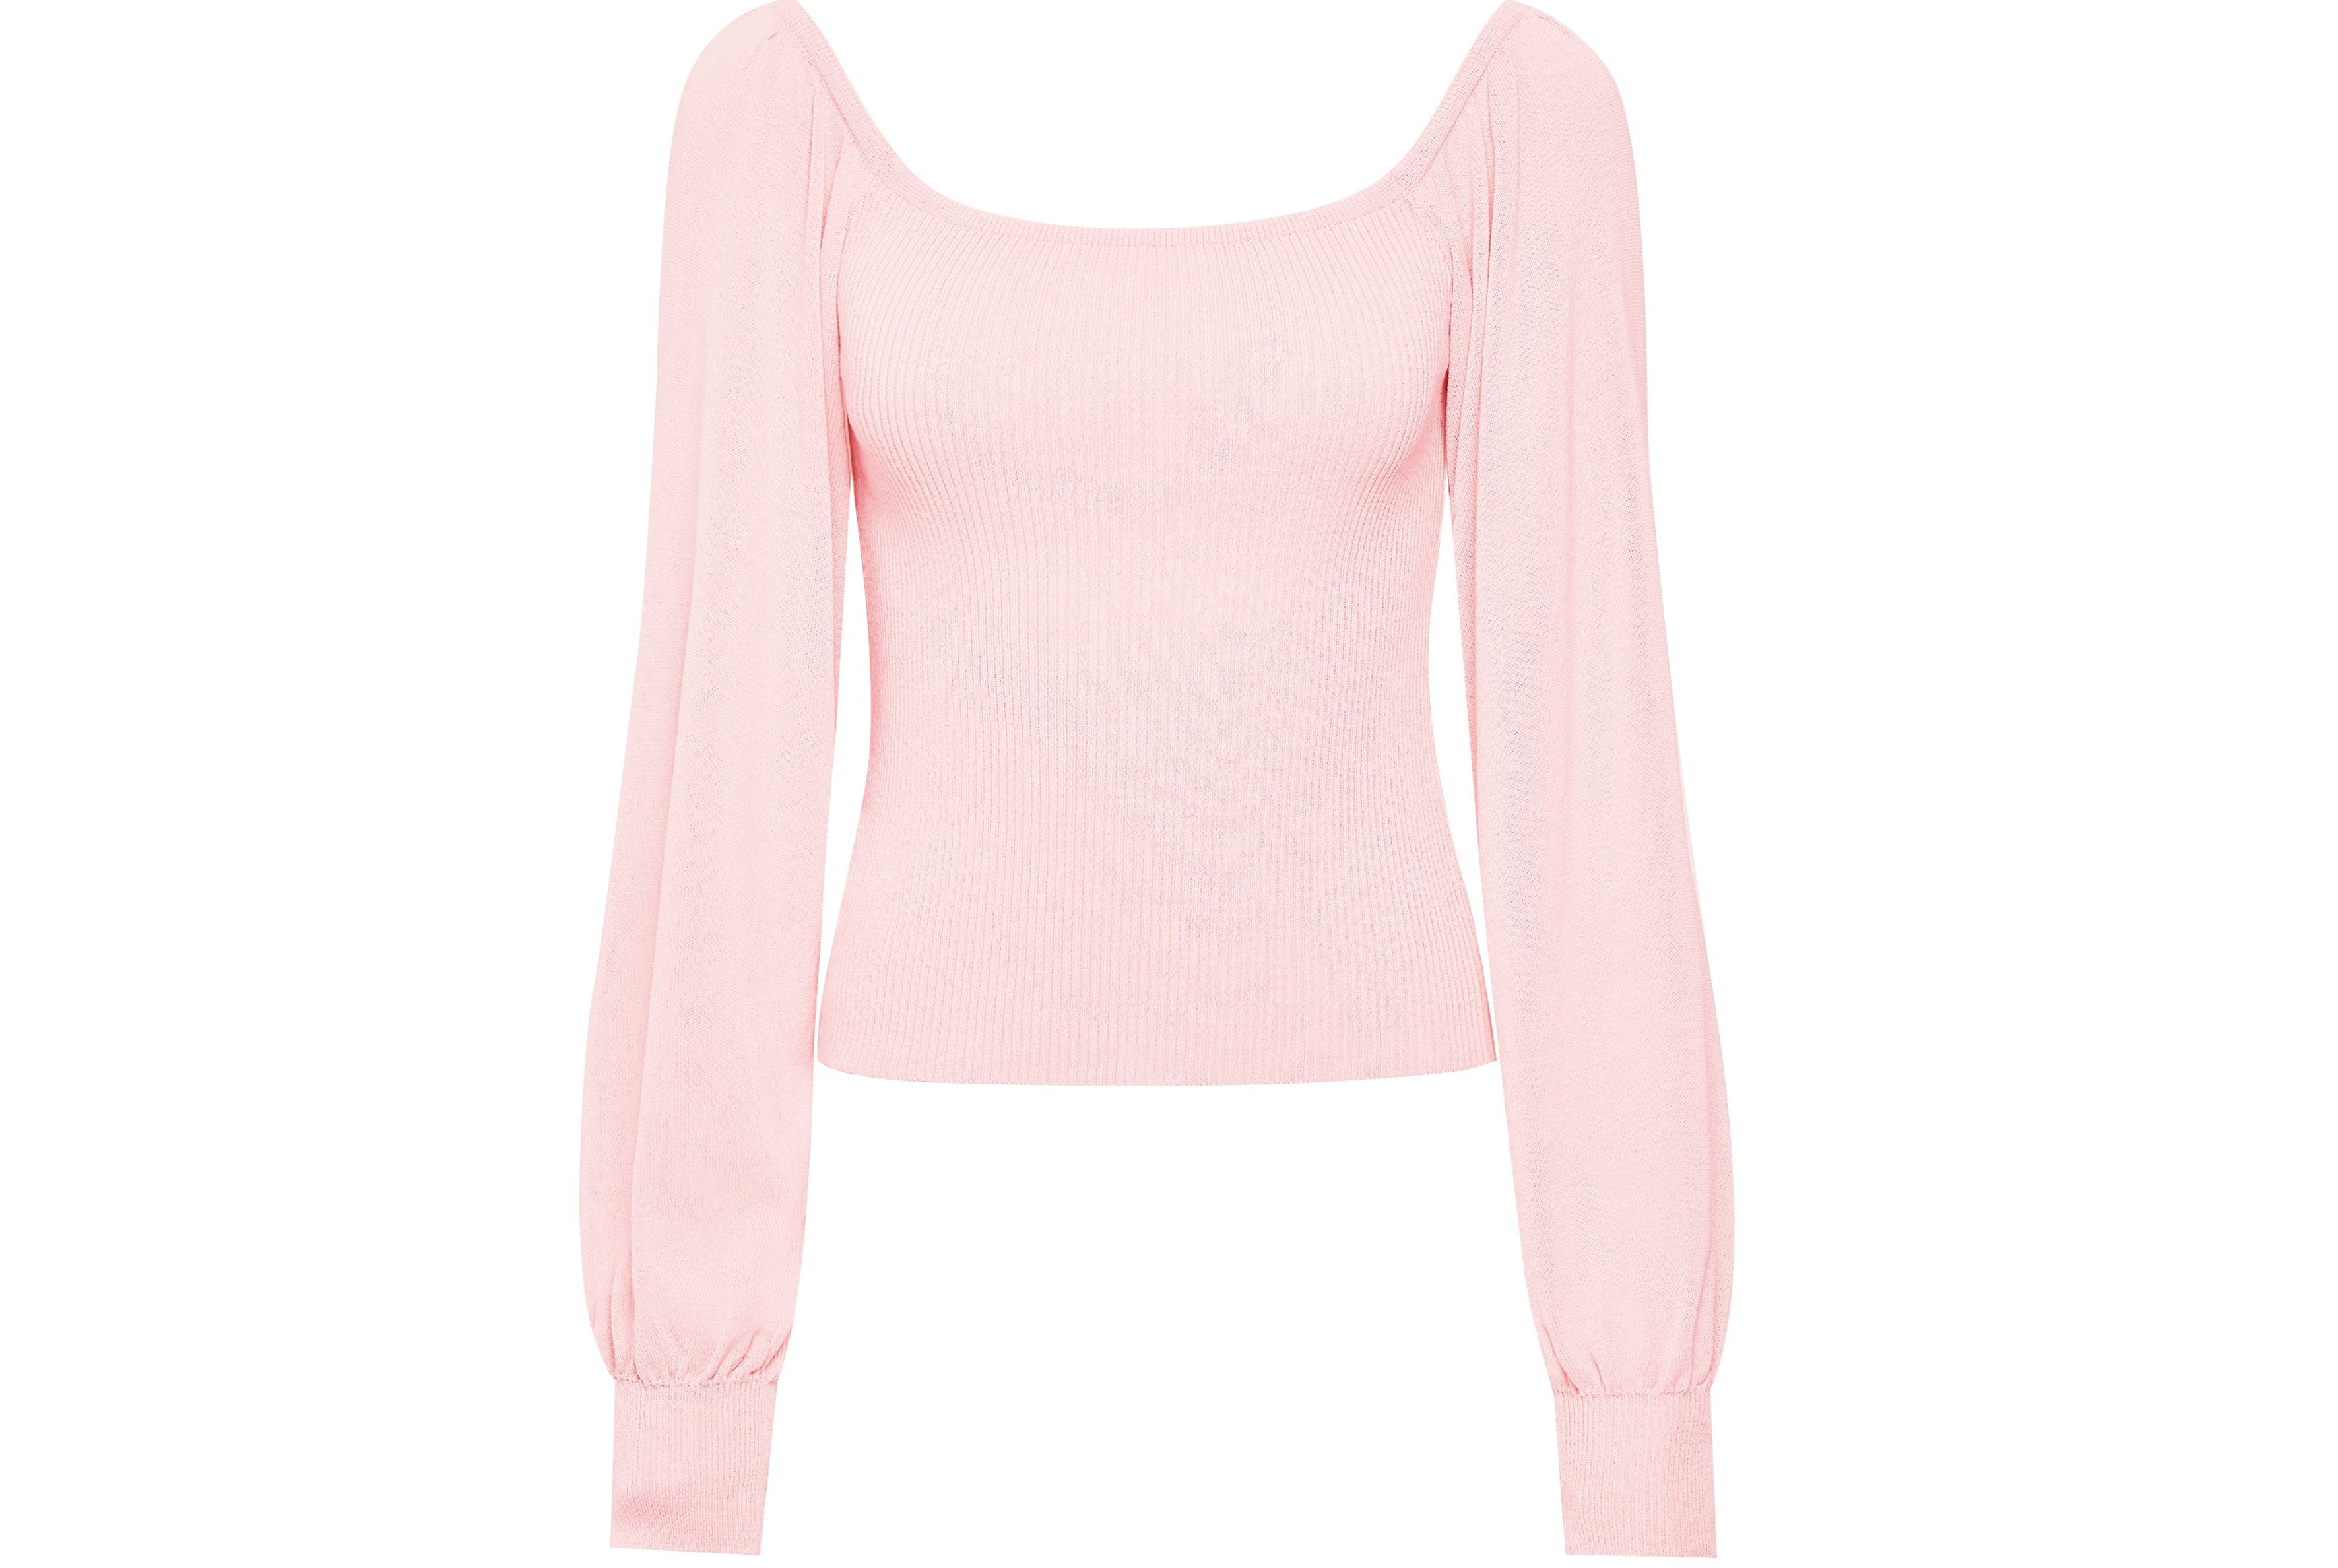 Dorothy Perkins Square Neck Volume Sleeve Jumper in Pink, £18.20 (was £26)